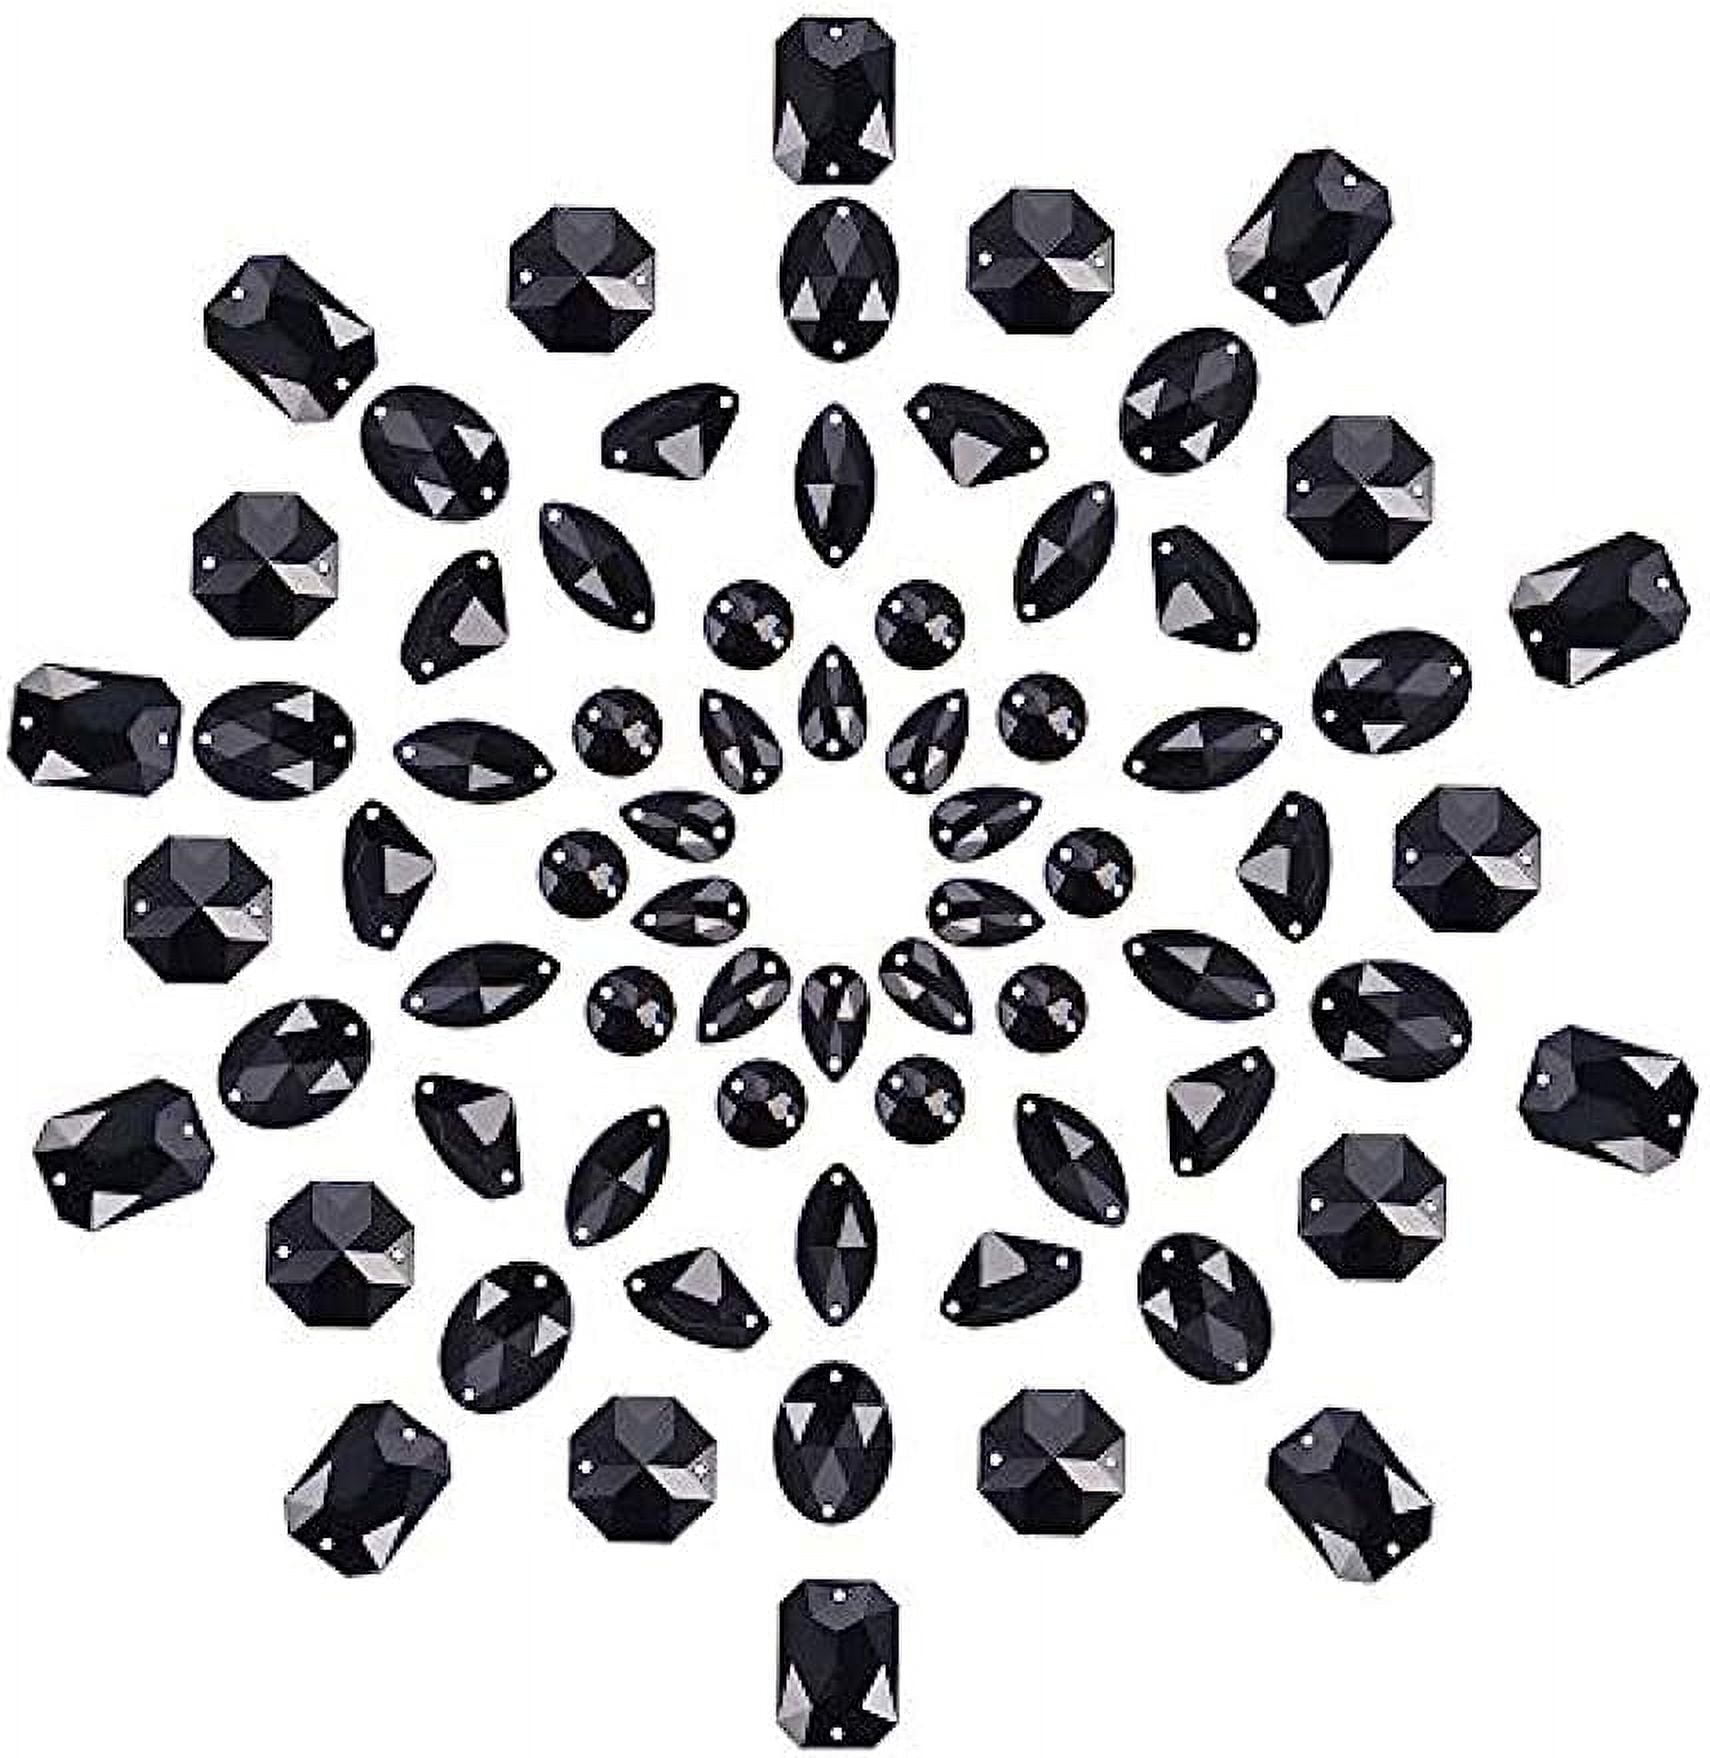 MIXED Shapes Black Gems Stones and Crystals Sew On Rhinestones Crystal  Stone Buttons For Sewing Prom Party Dresses decoration